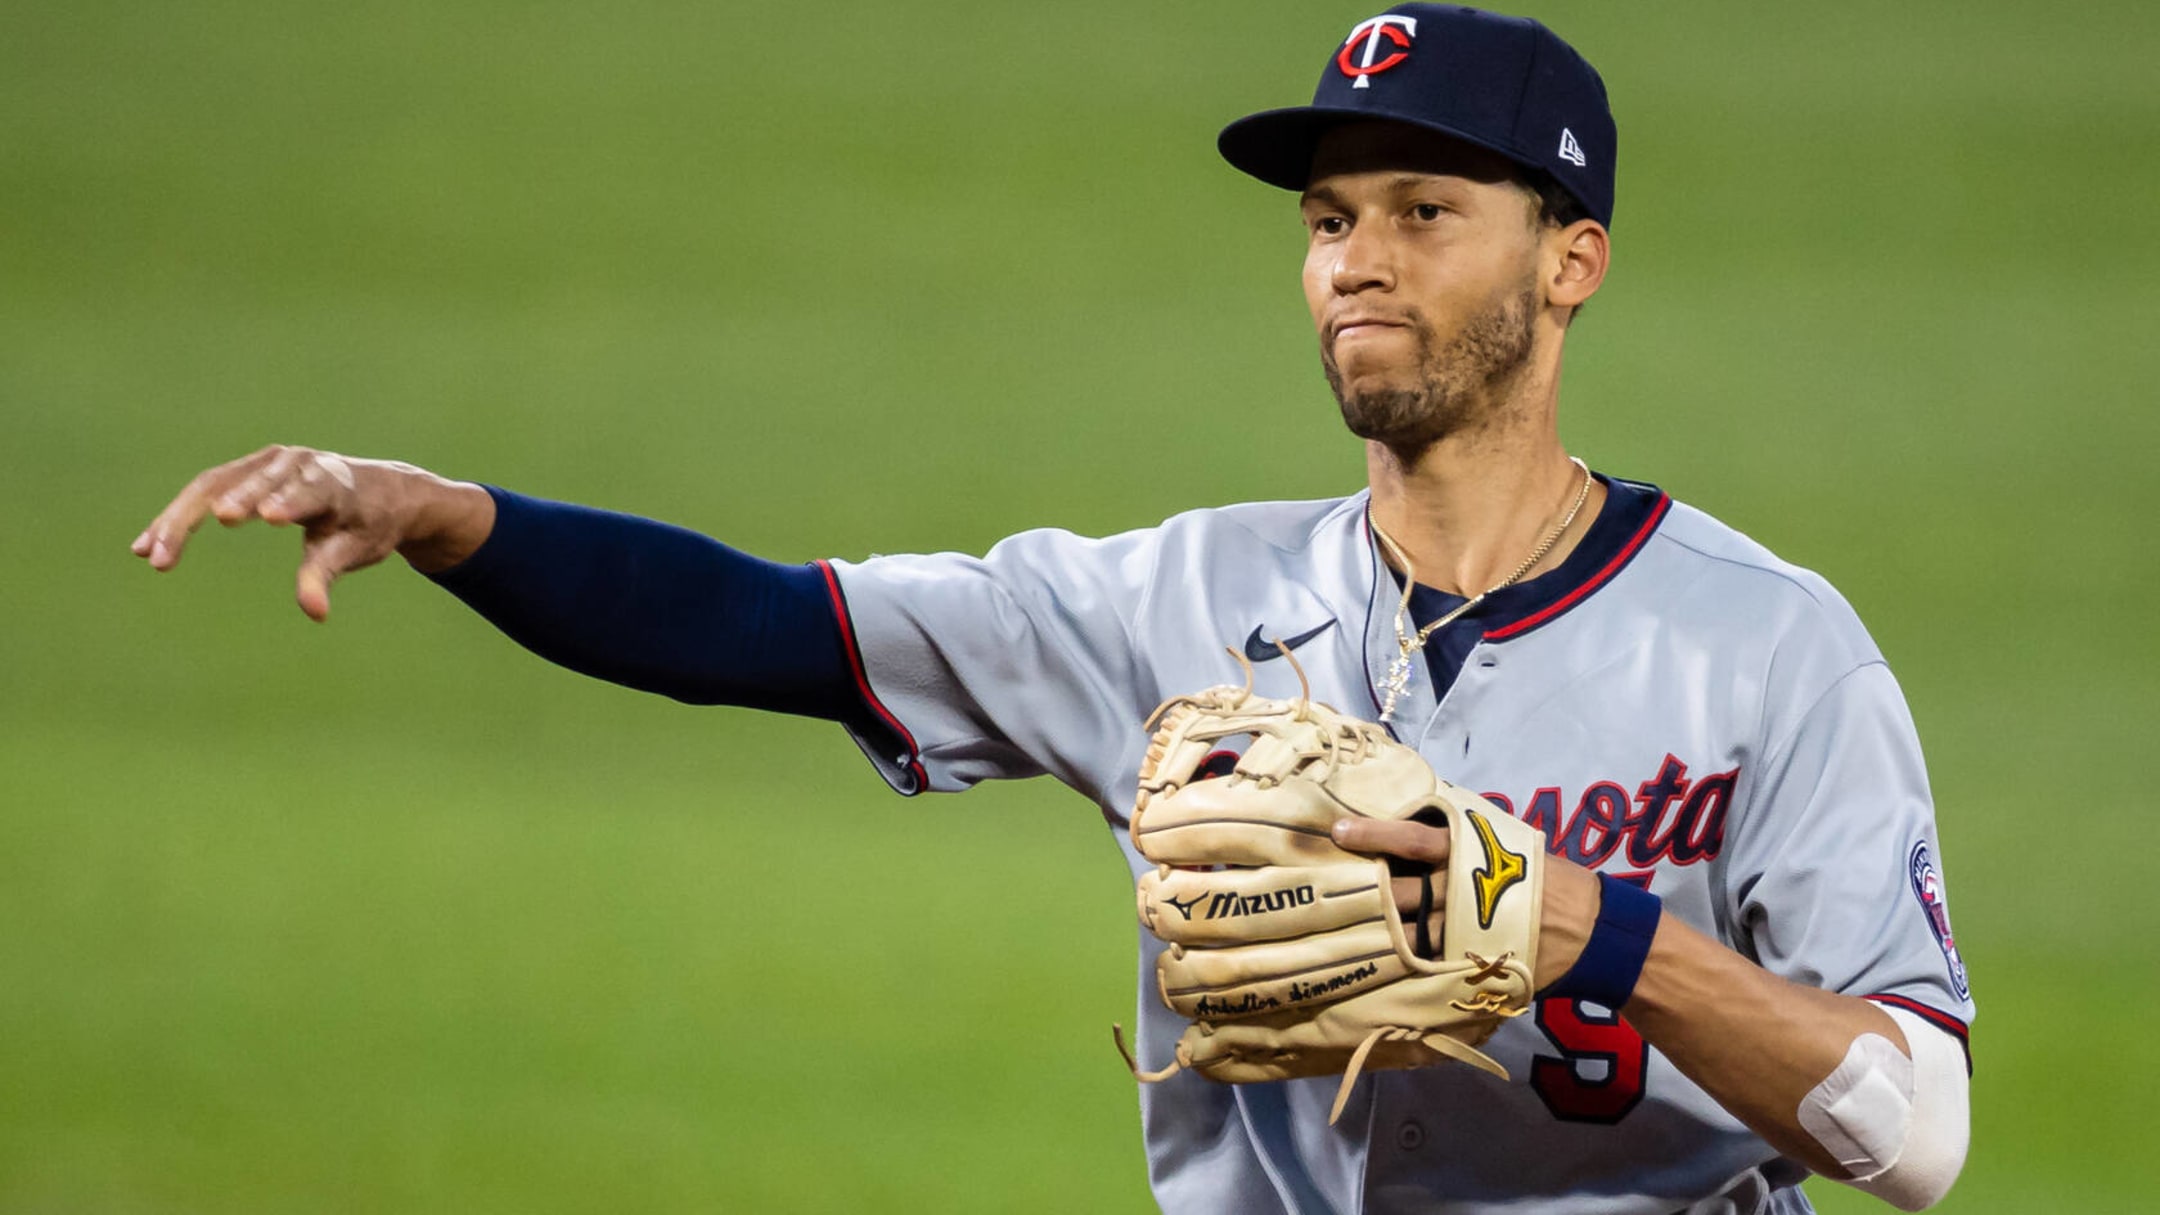 Atlanta Braves: Is Andrelton Simmons the Next Extension Candidate